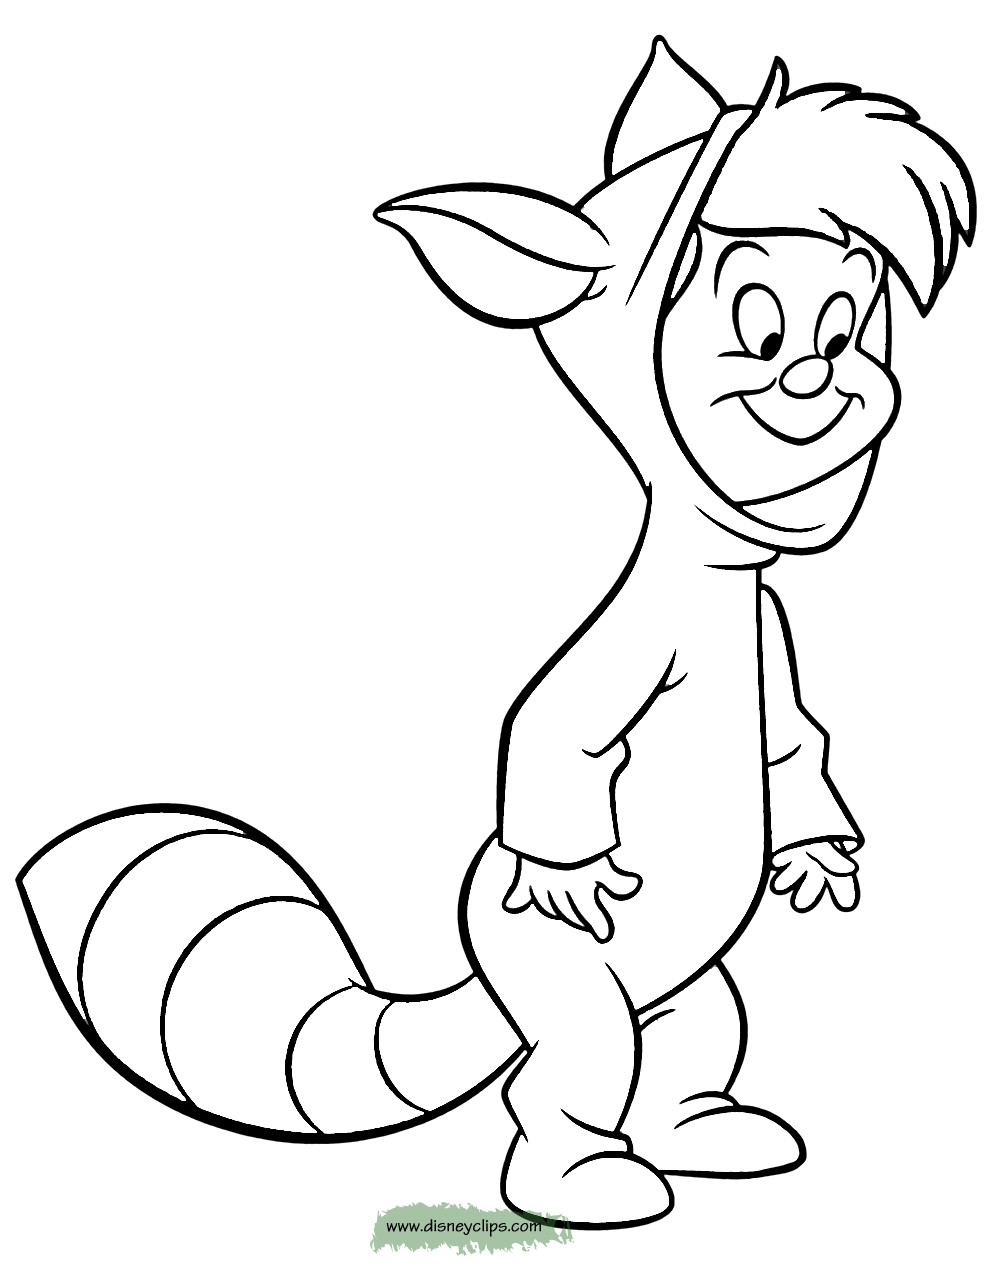 Lost Boys Coloring Pages Printable
 Peter Pan & Tinker Bell Printable Coloring Pages